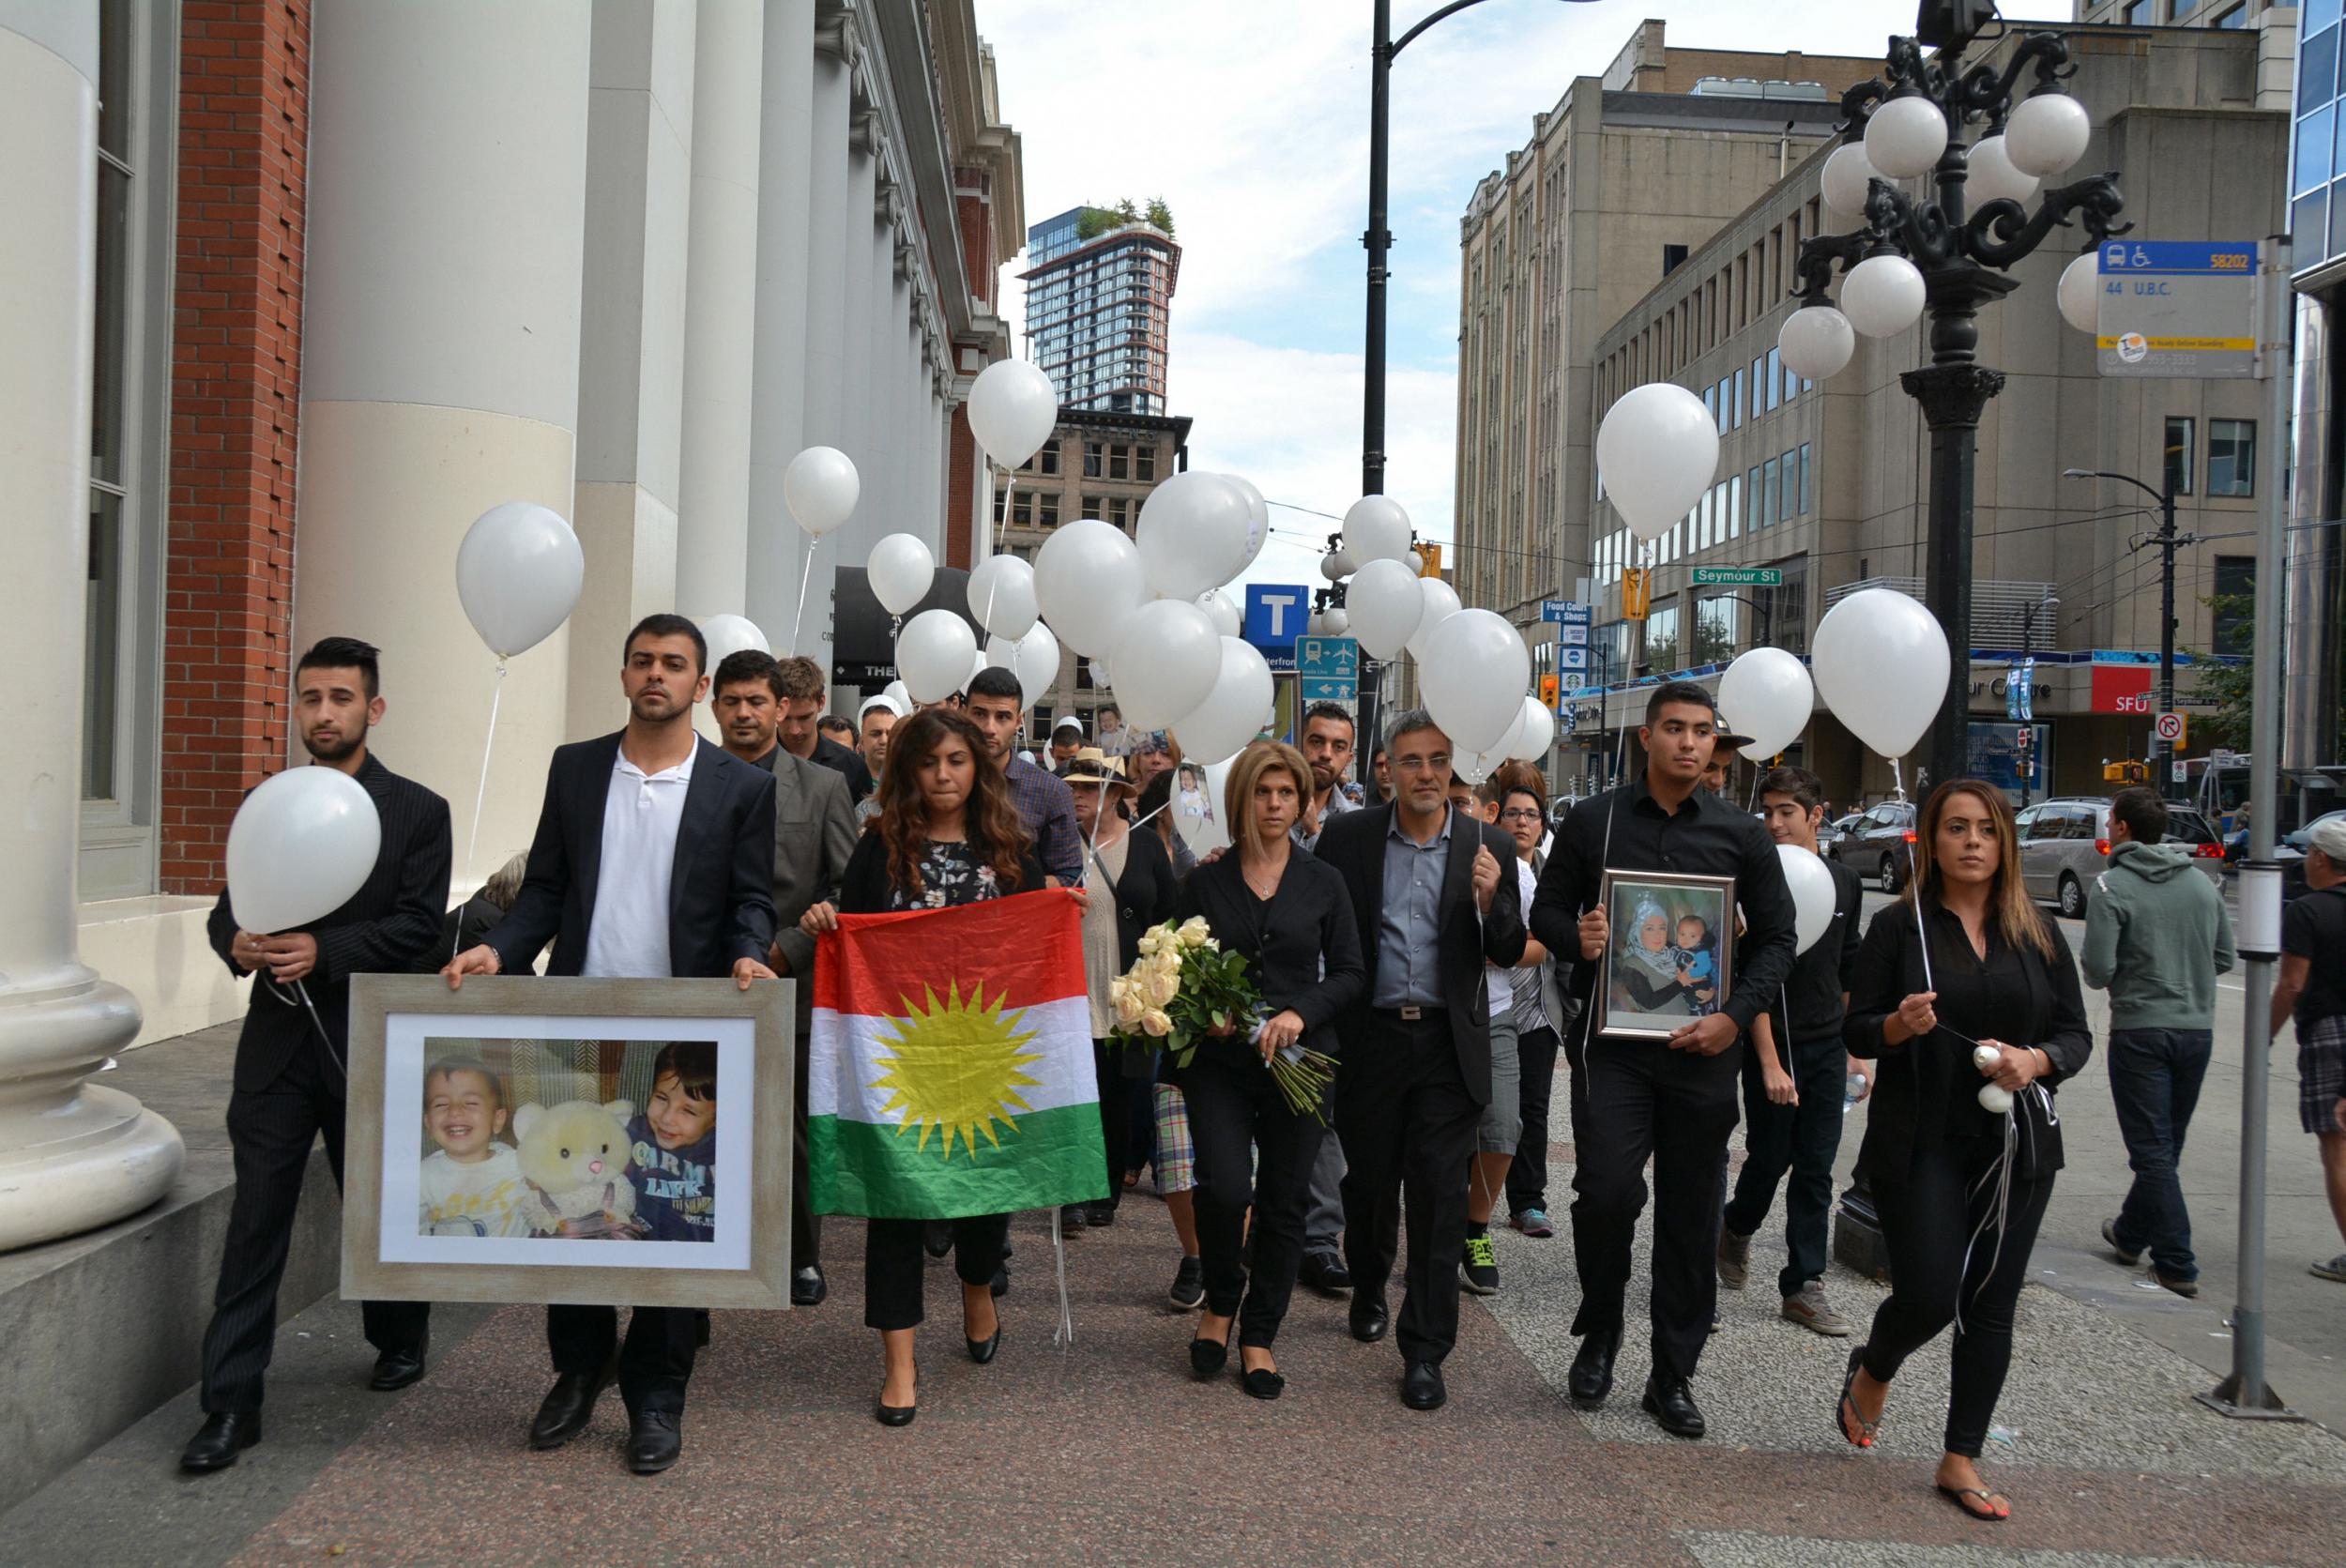 Tima Kurdi, a Canadian who is sponsoring the family, released balloons in memory of those who died